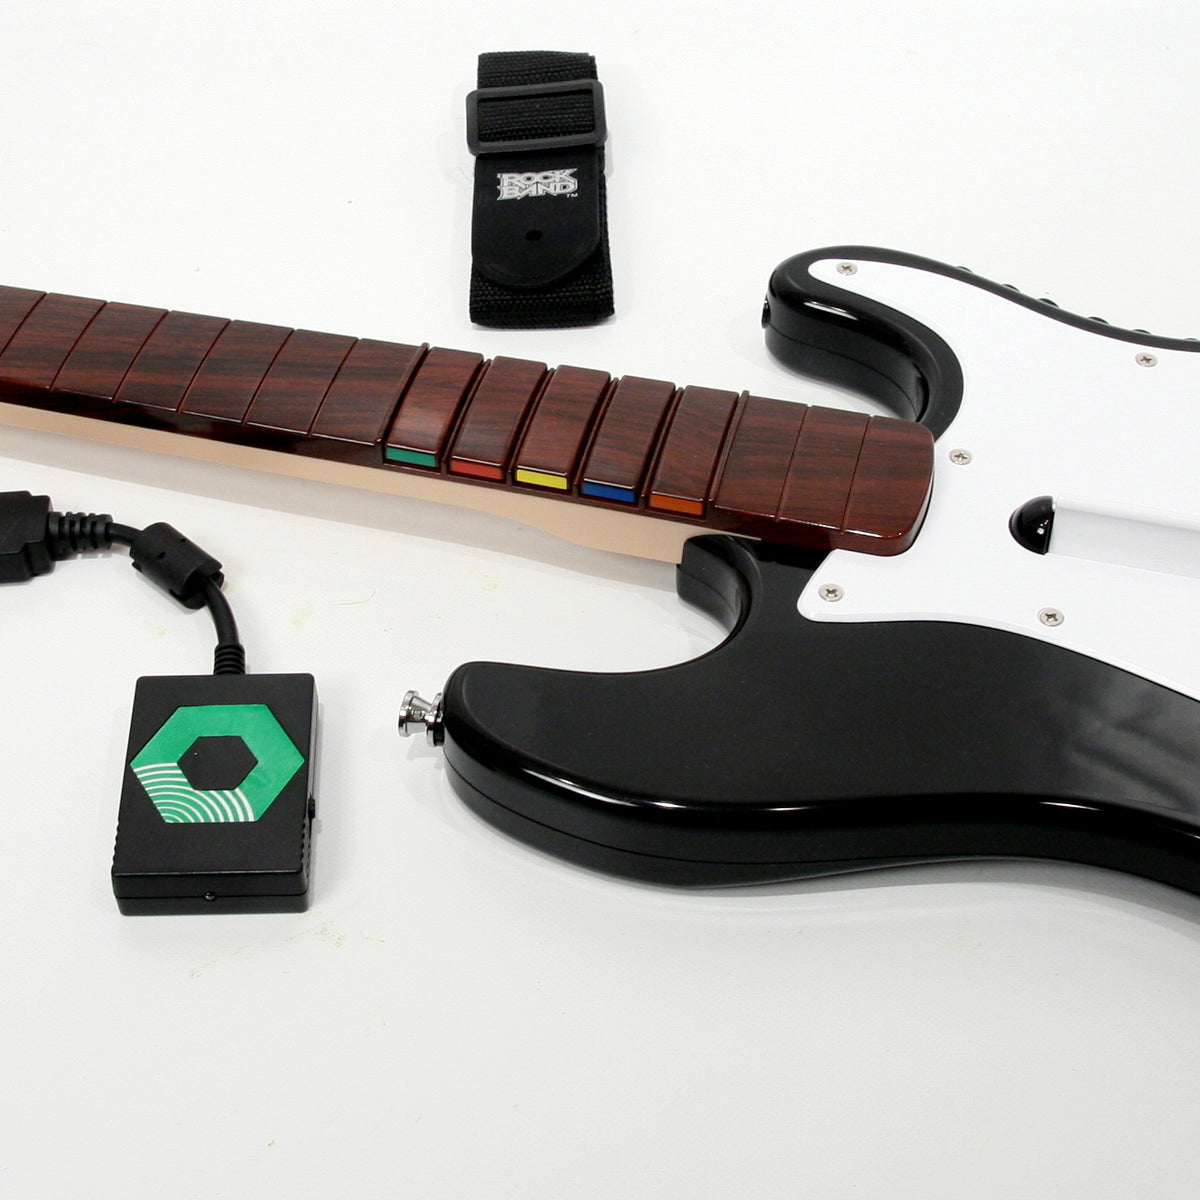 Rock Band and Guitar Hero Switch Enabled Wireless Guitars for PS3